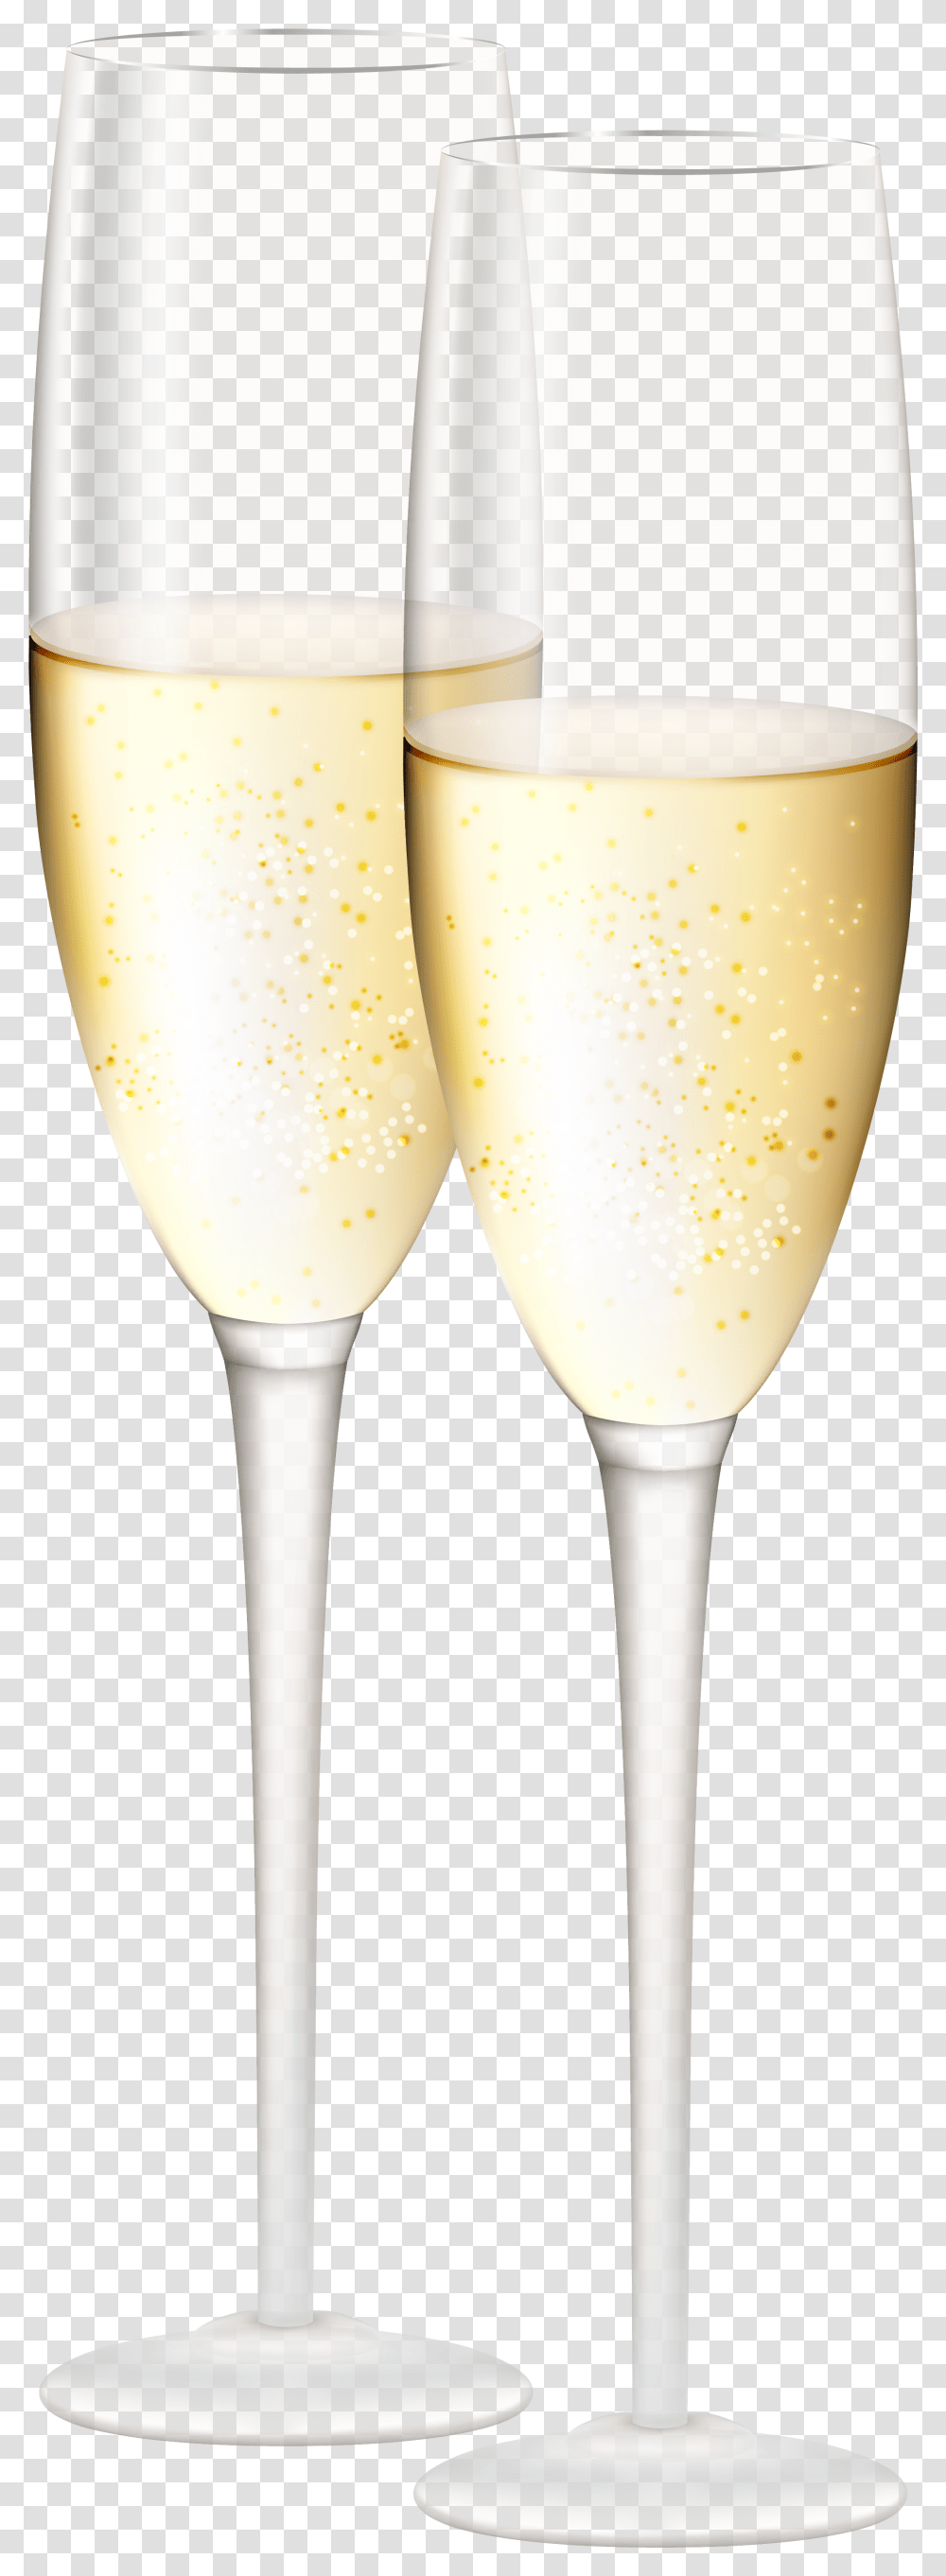 White Wine Champagne Glass Cocktail Wine Glass Champagne Glass, Lamp, Alcohol, Beverage, Drink Transparent Png